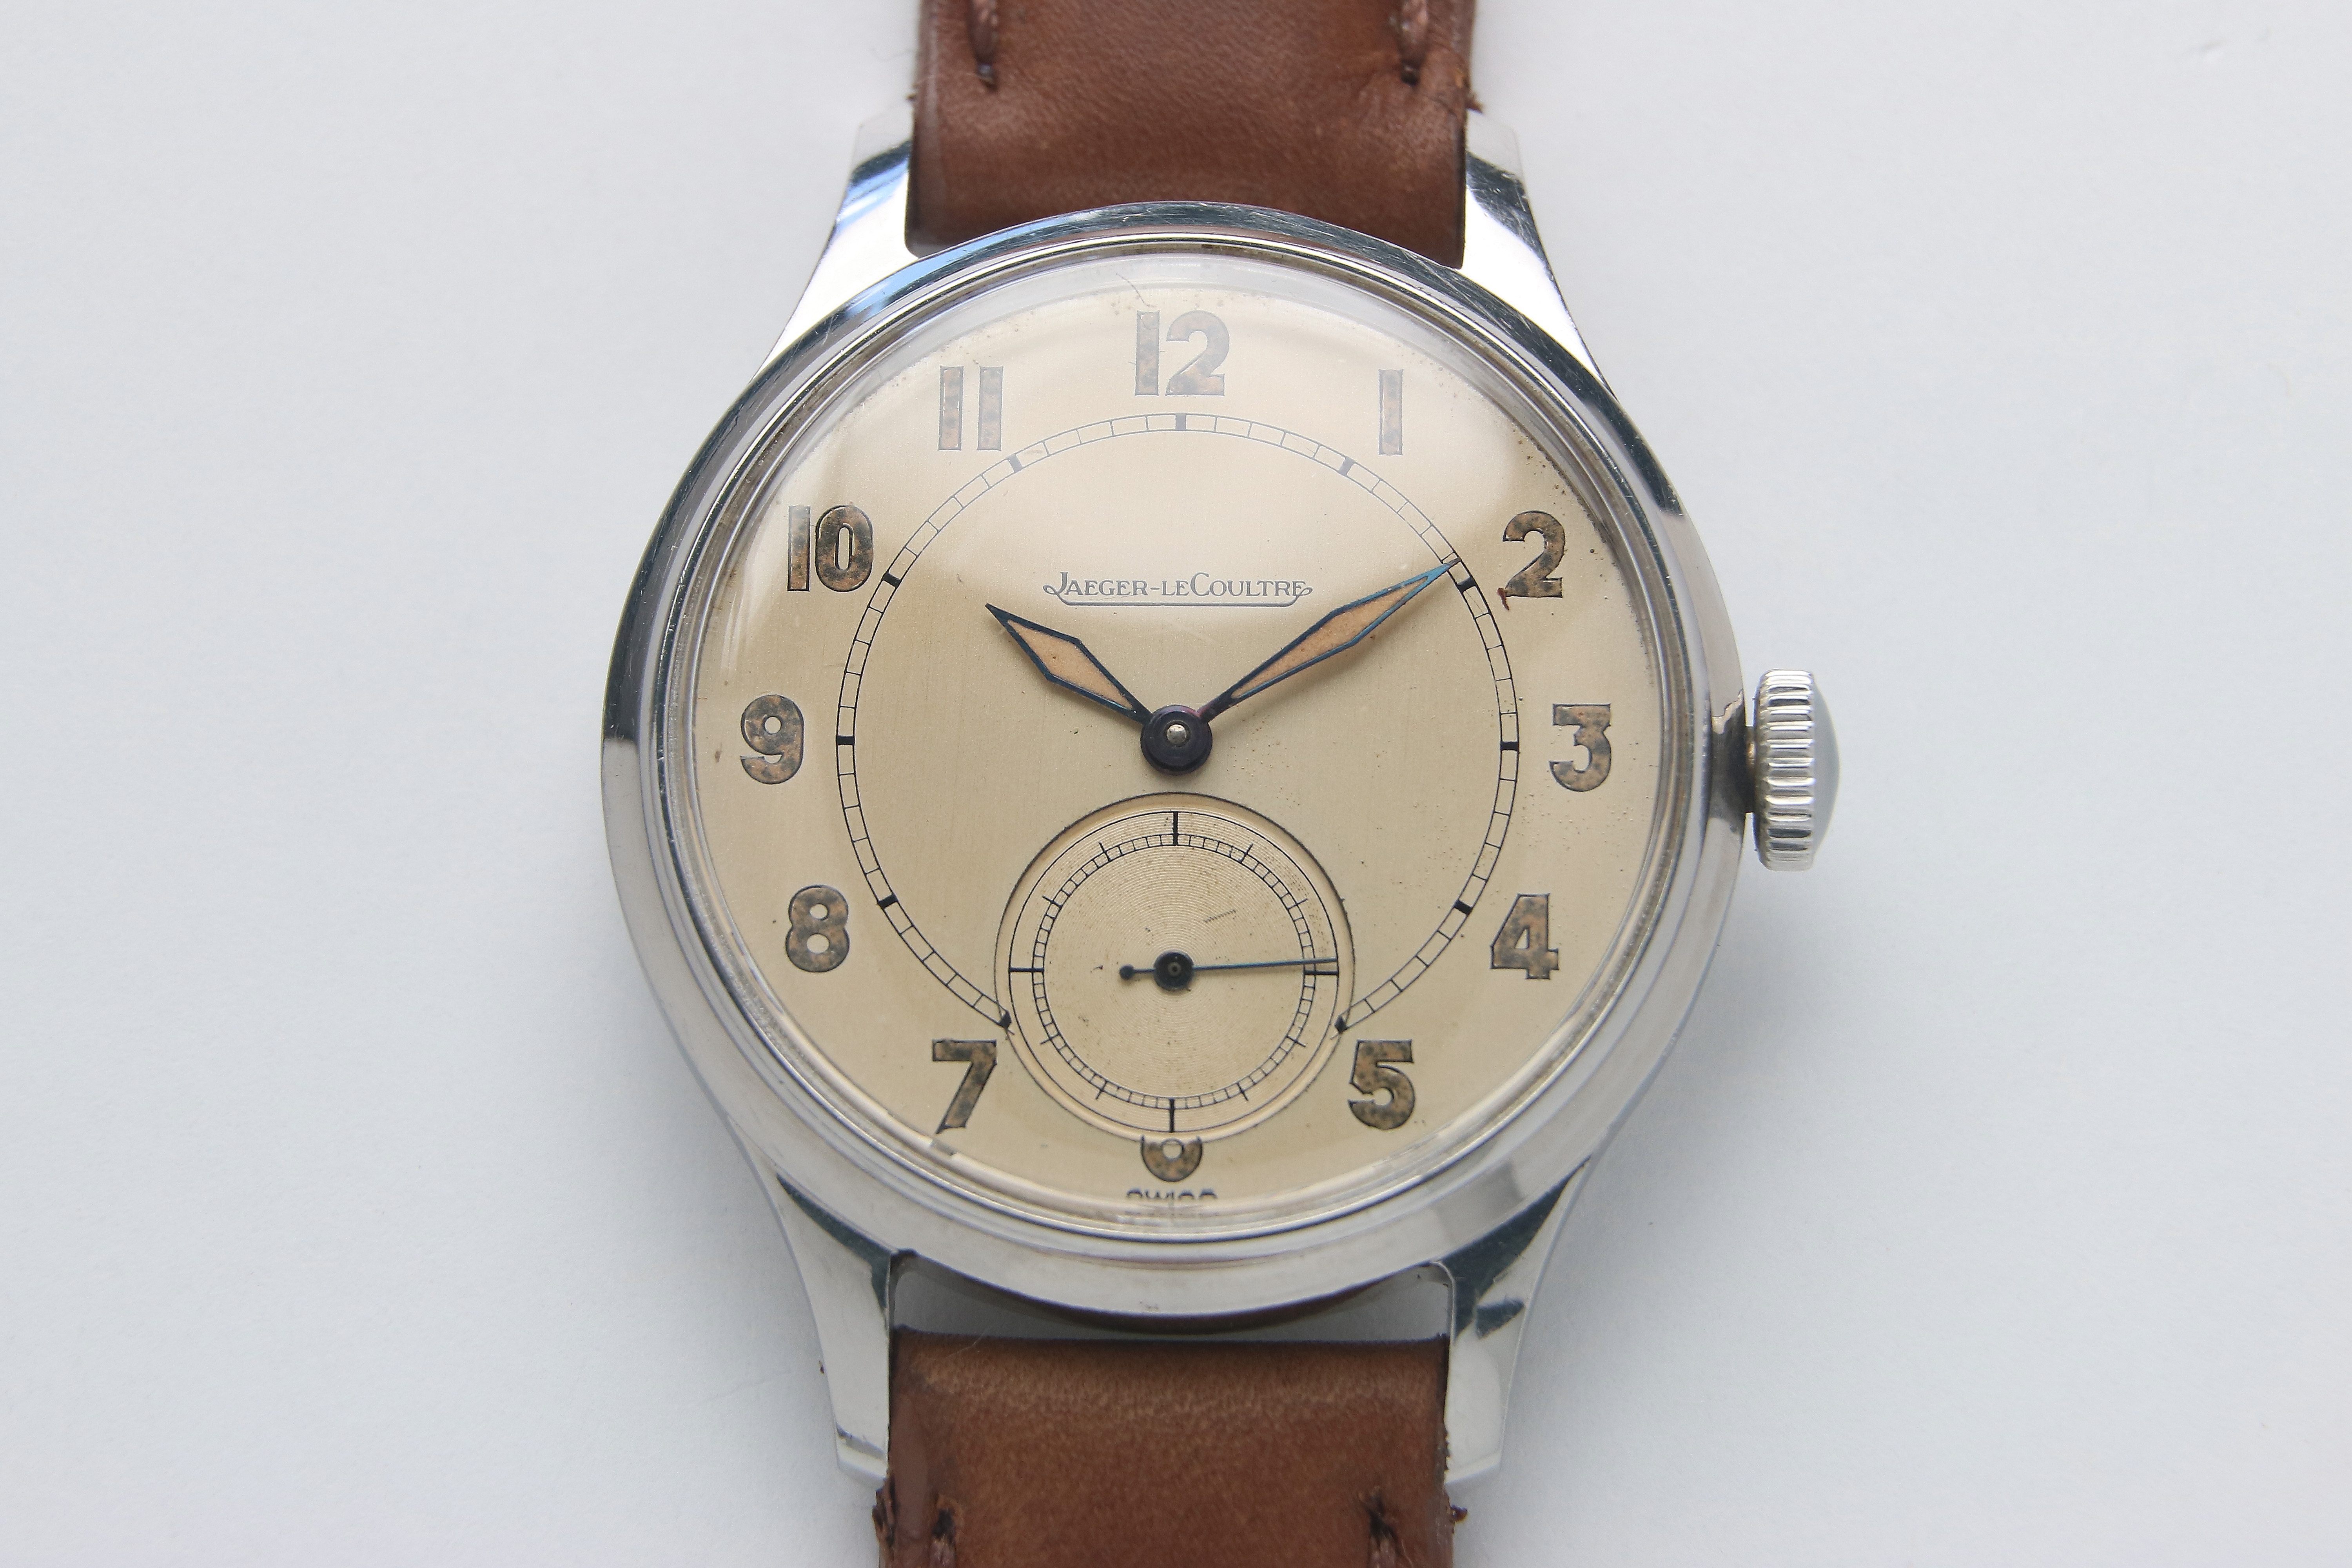 Jaeger lecoultre watch serial numbers